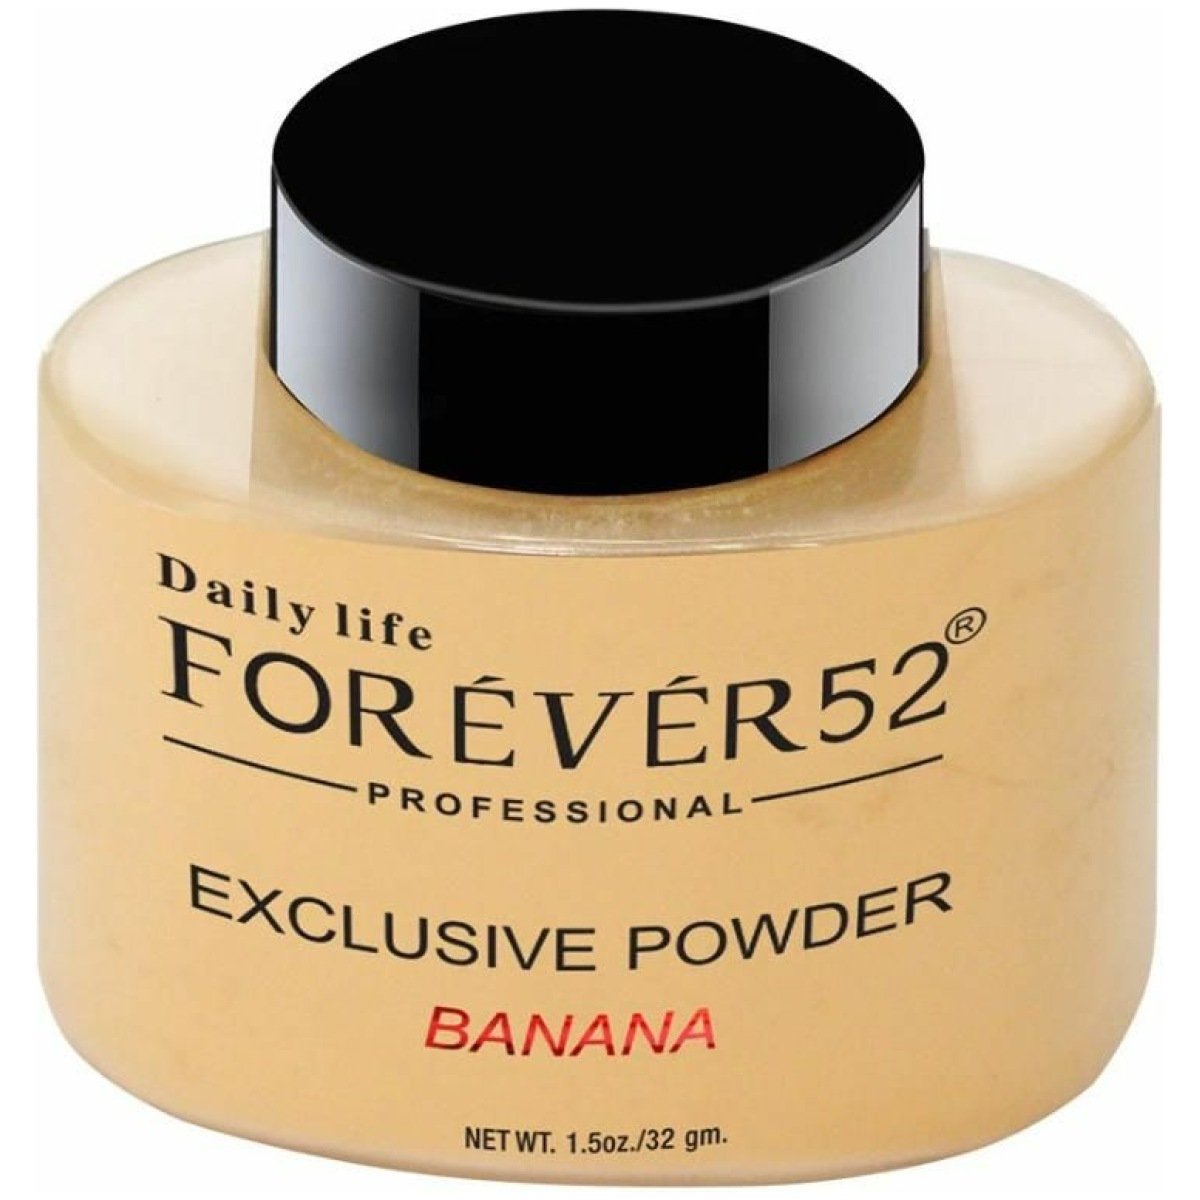 Daily Life Forever52 Exclusive Banana Powder - FBE001